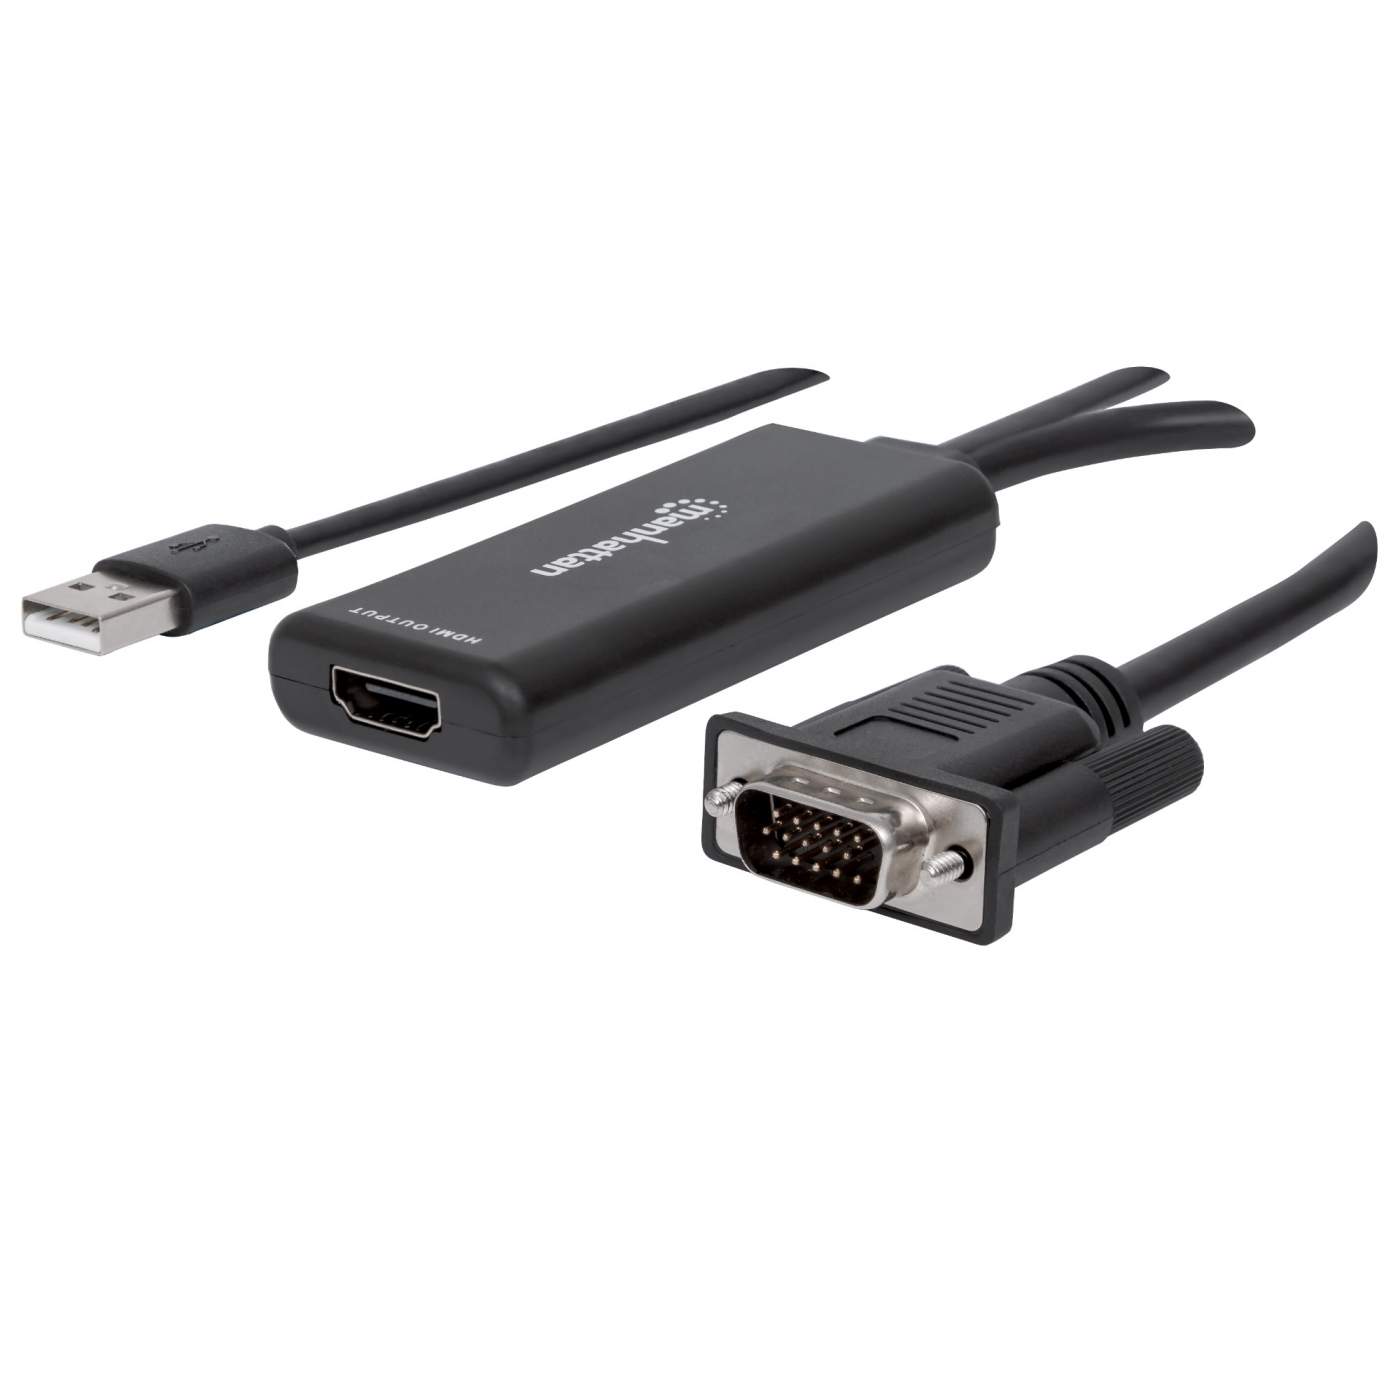 VGA to HDMI Adapter for Monitor and TV (VGA to HDMI Converter) with Audio  Support 